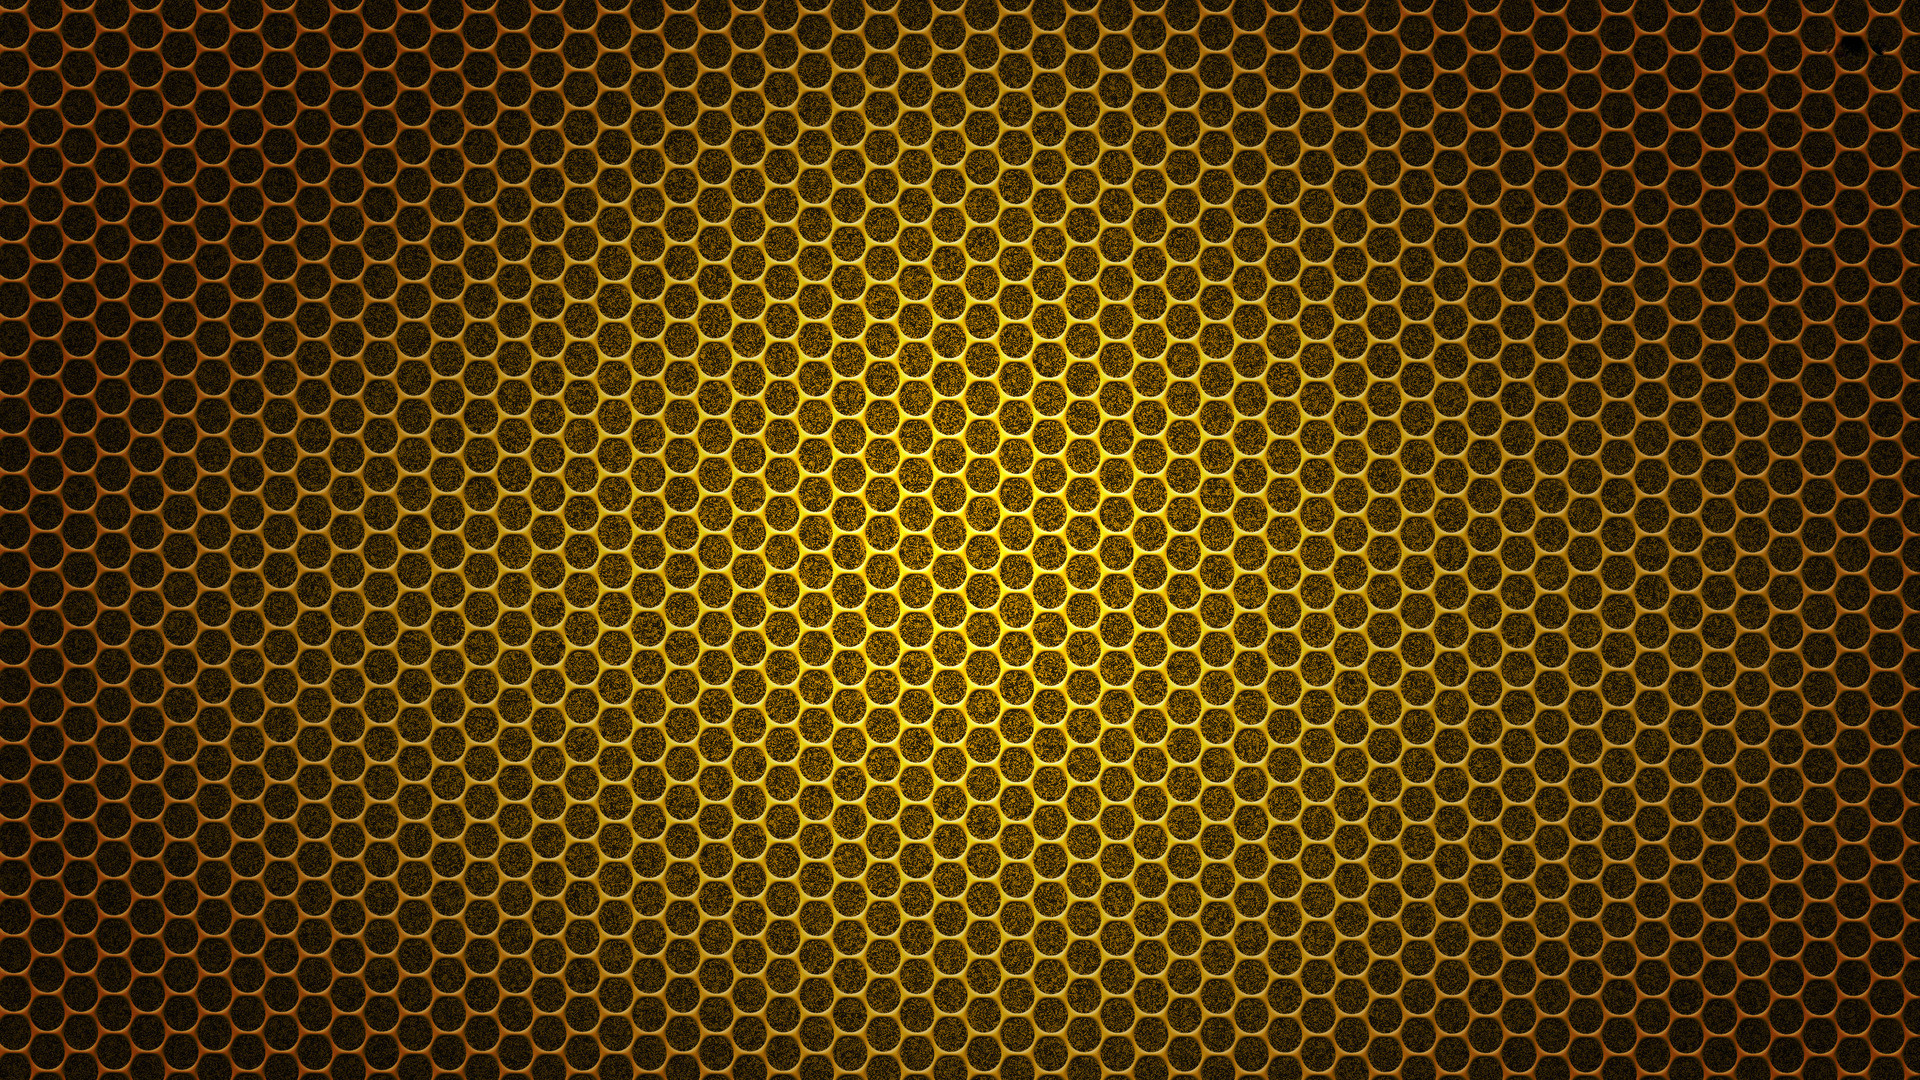 1920x1080 gold pattern desktop background wallpapers cool images download free 4k  amazing background wallpapers widescreen digital photos 1920Ã1080 Wallpaper  HD